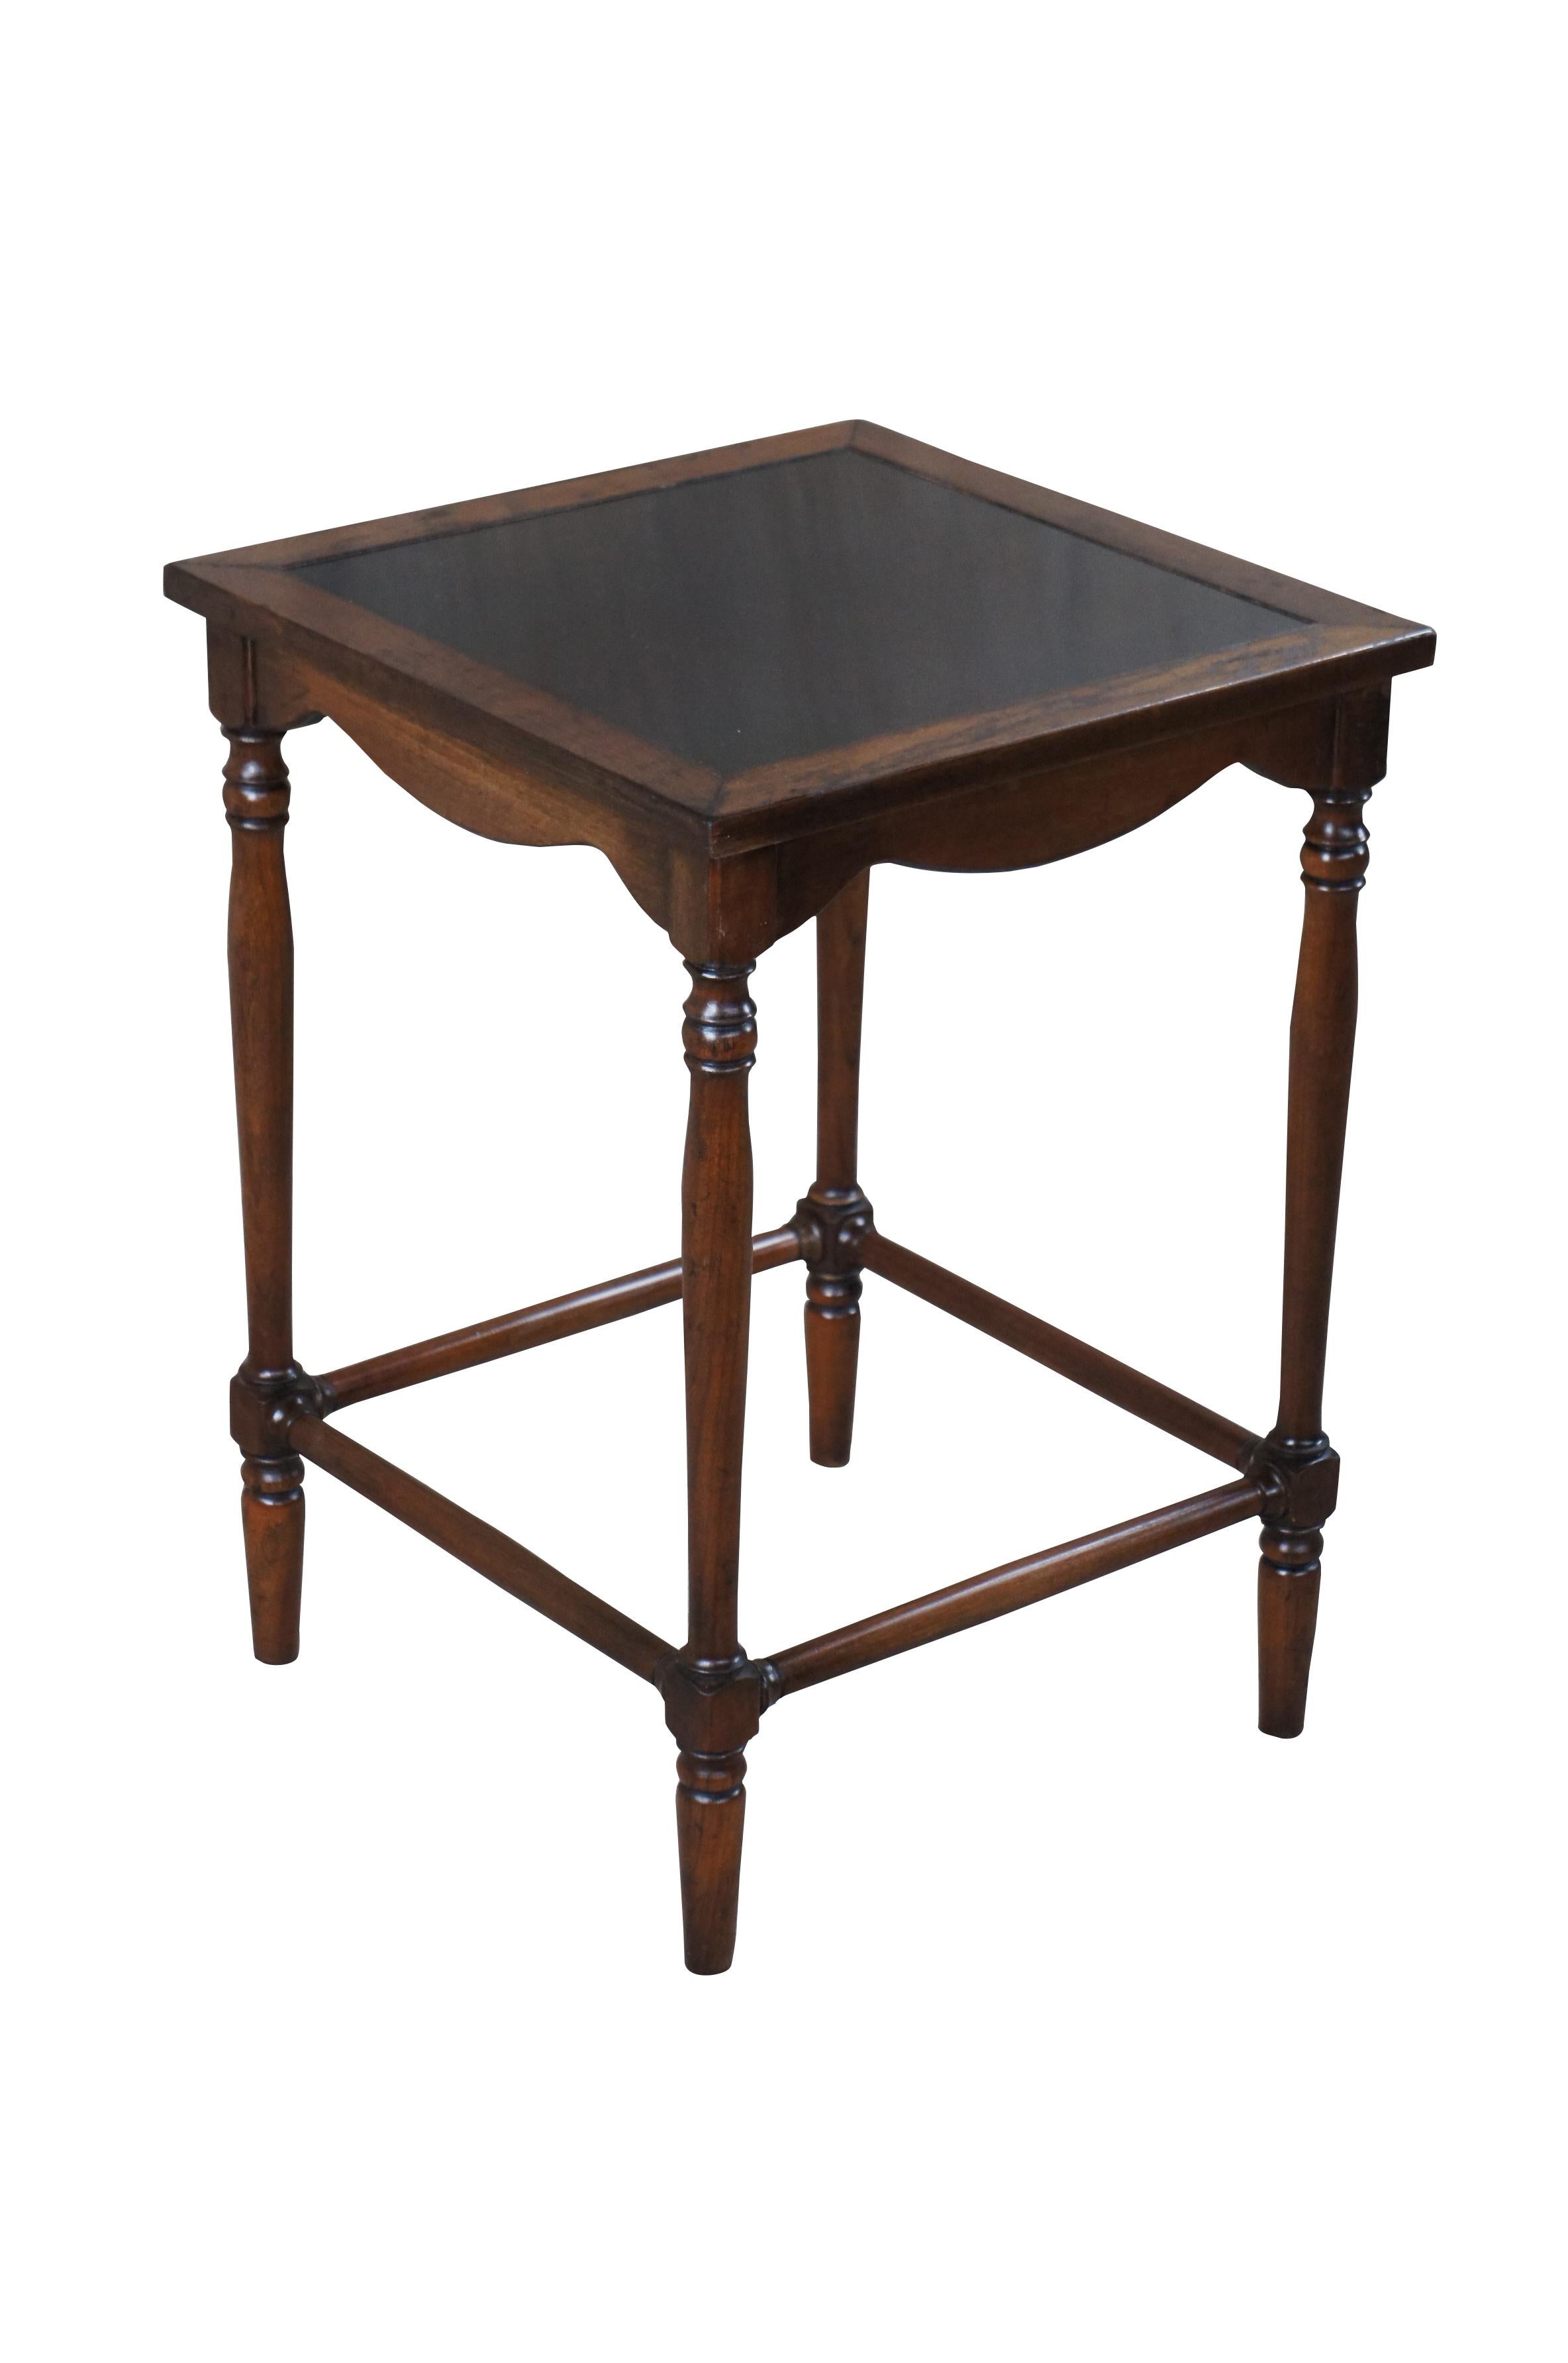 Vintage Statton Trutype Americana collection side table or plant stand.  Made of oak featuring turned supports with a black formica inset top.

Statton Furniture was a staple in Fine Furniture stores across the country. Their elegant, Made in